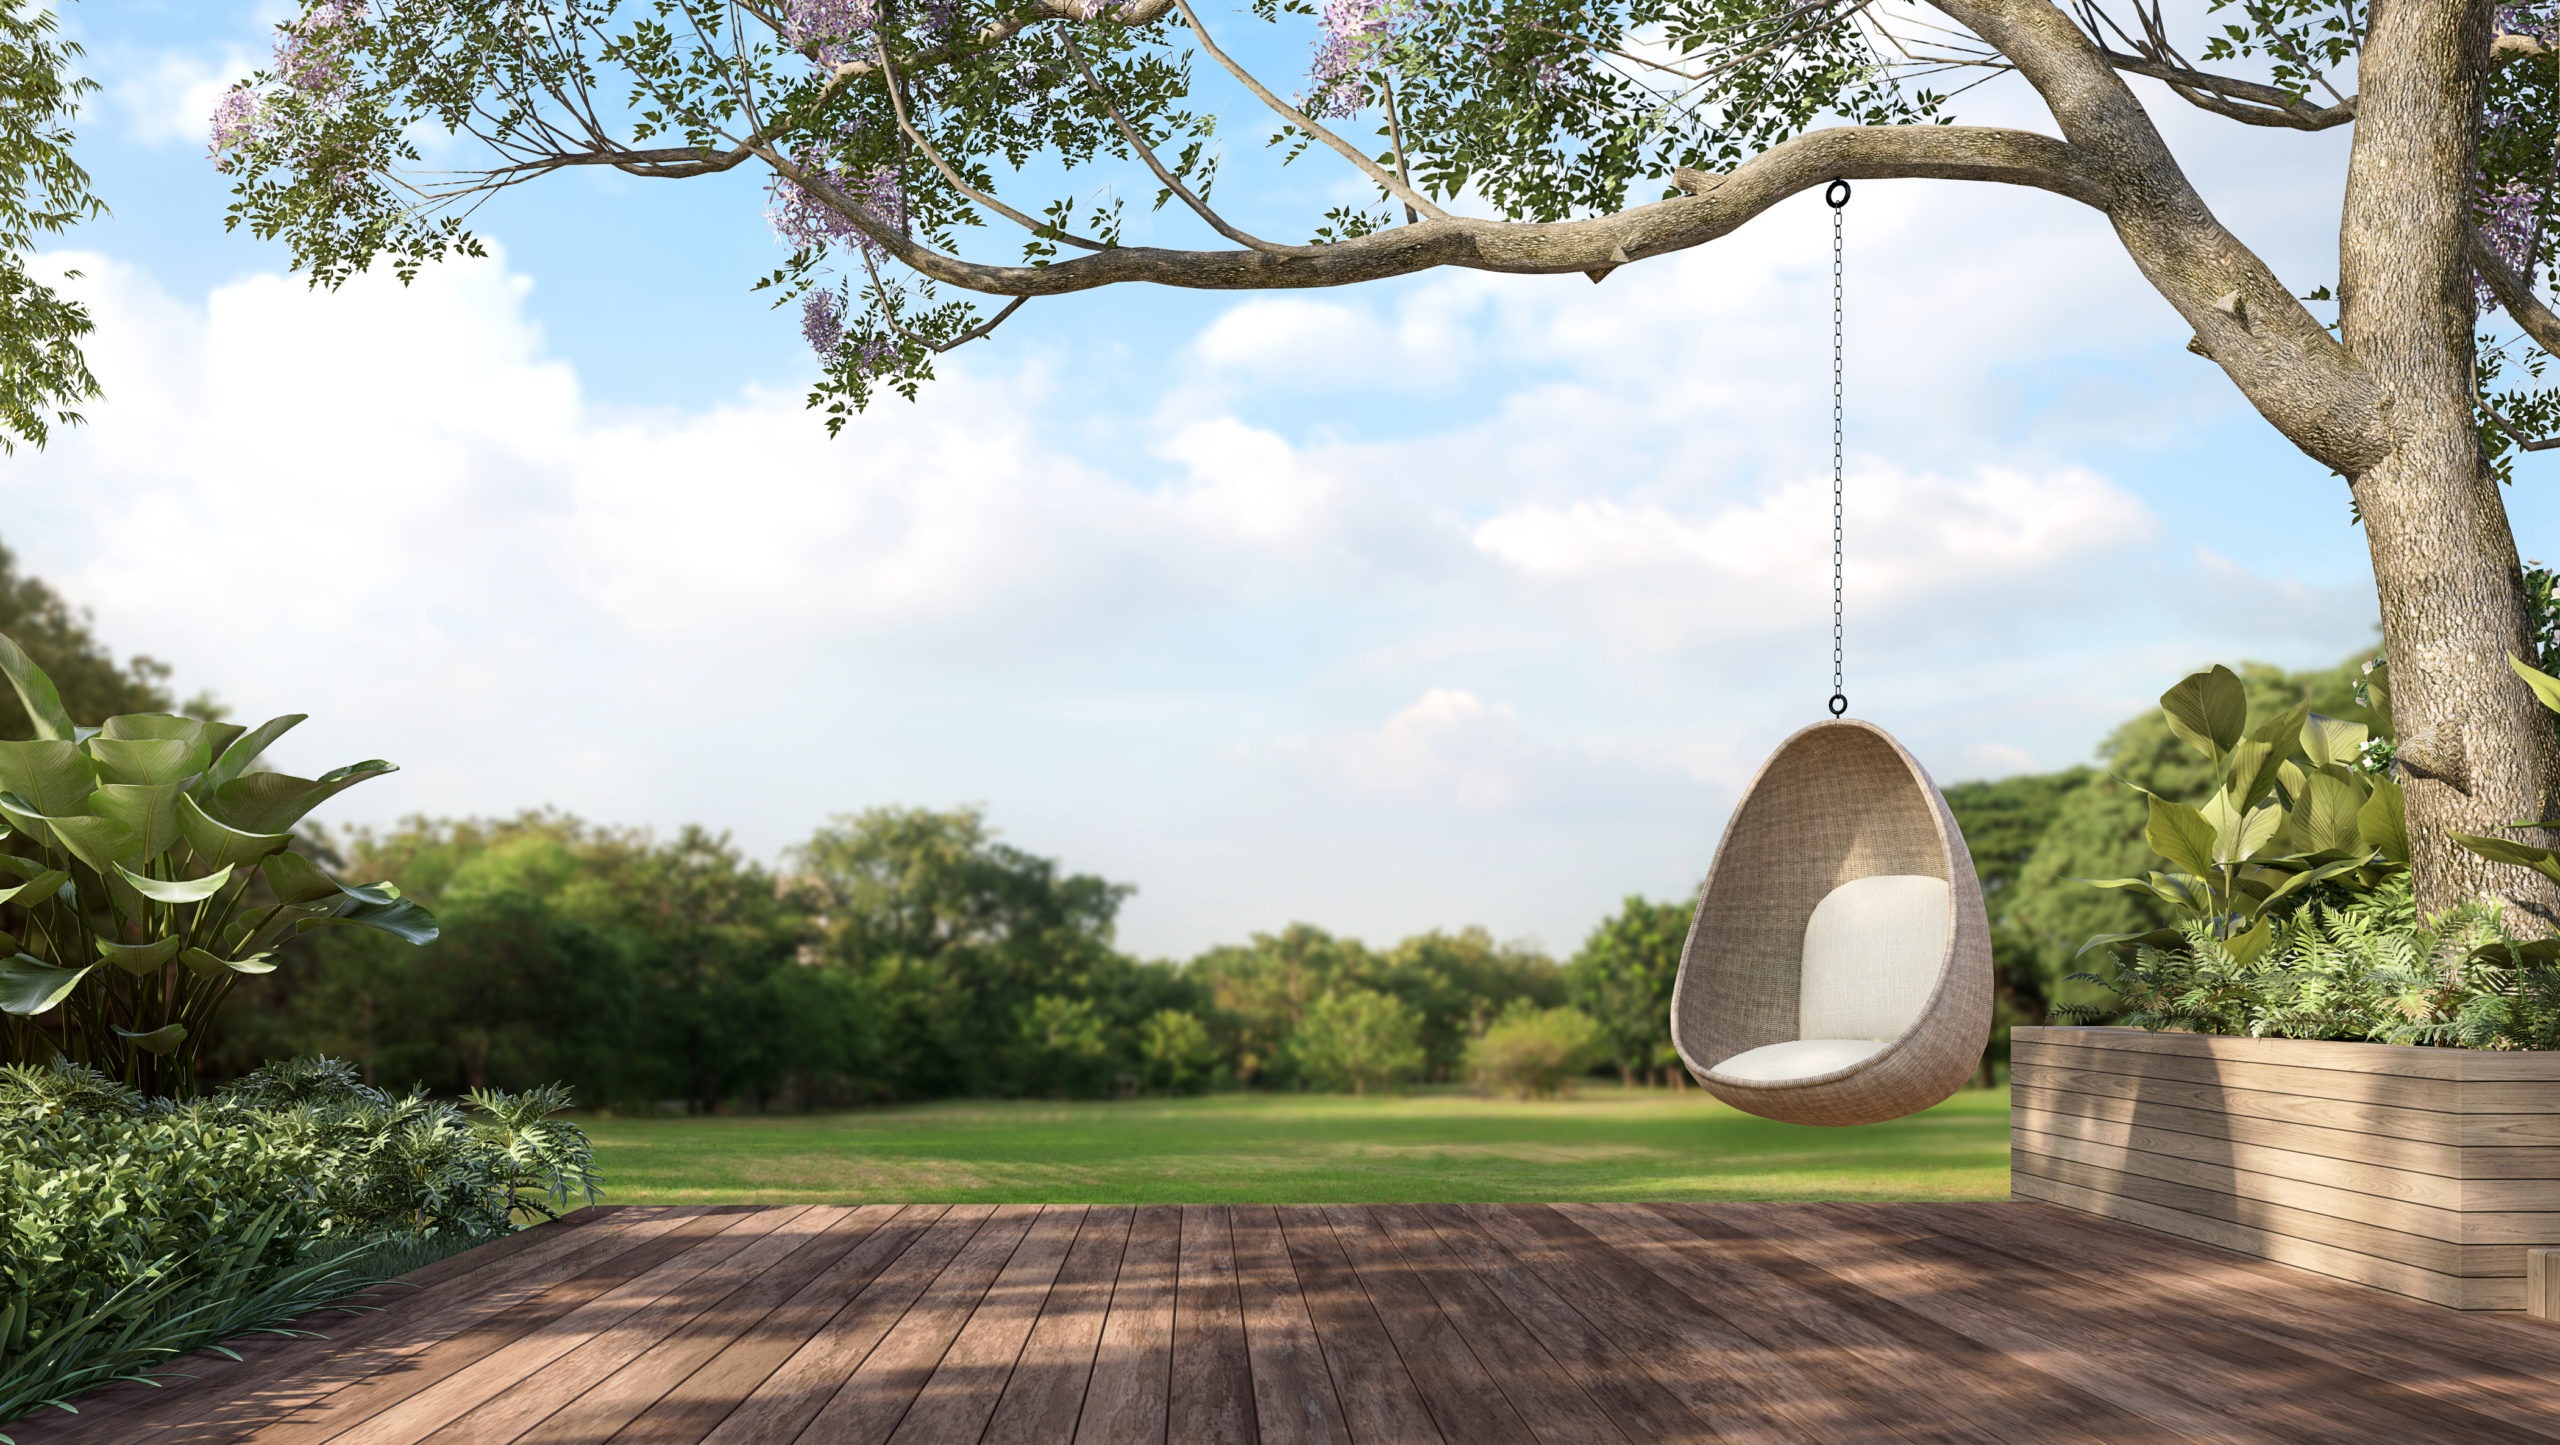 wooden outdoor relaxation area with a rattan hammock hanging on a tree